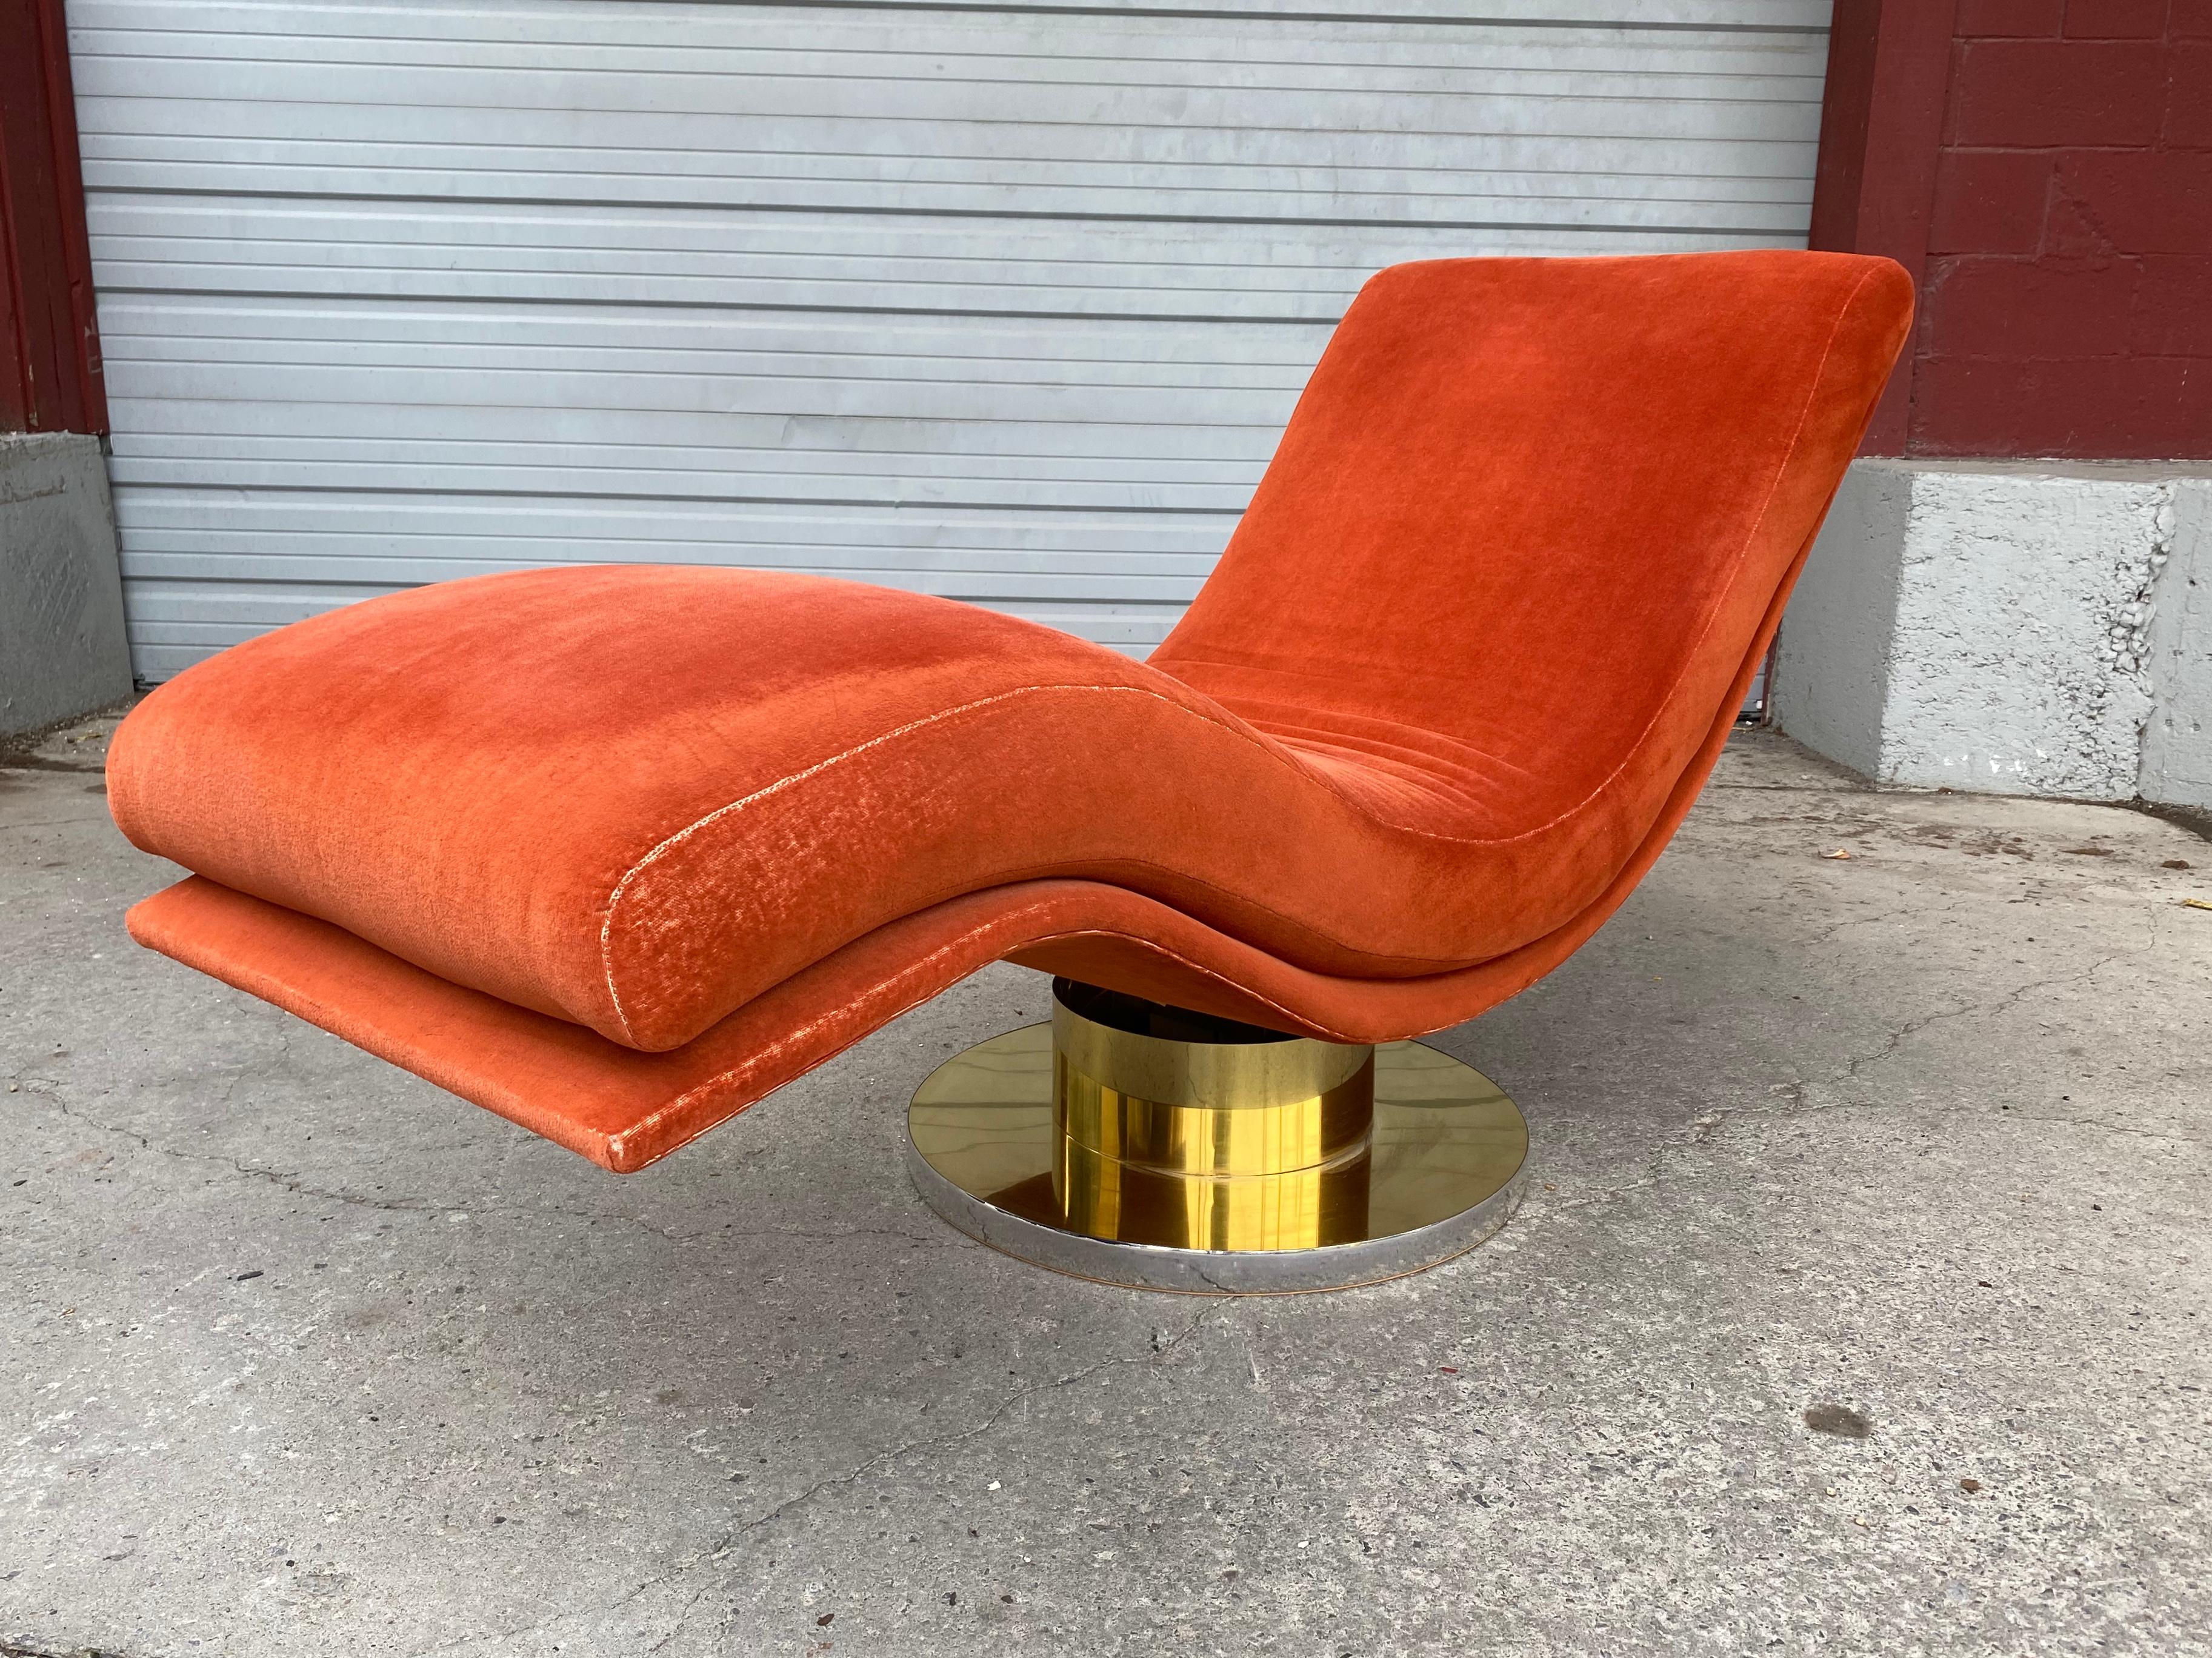 Stunning swivel rocking wave chaise lounge by Milo Baughman for Thayer Coggin with polished brass and chrome base. Mid-Century Modern. Classic modernist design, Retains original electric orange fabric, minor edge wear, also retains original Milo